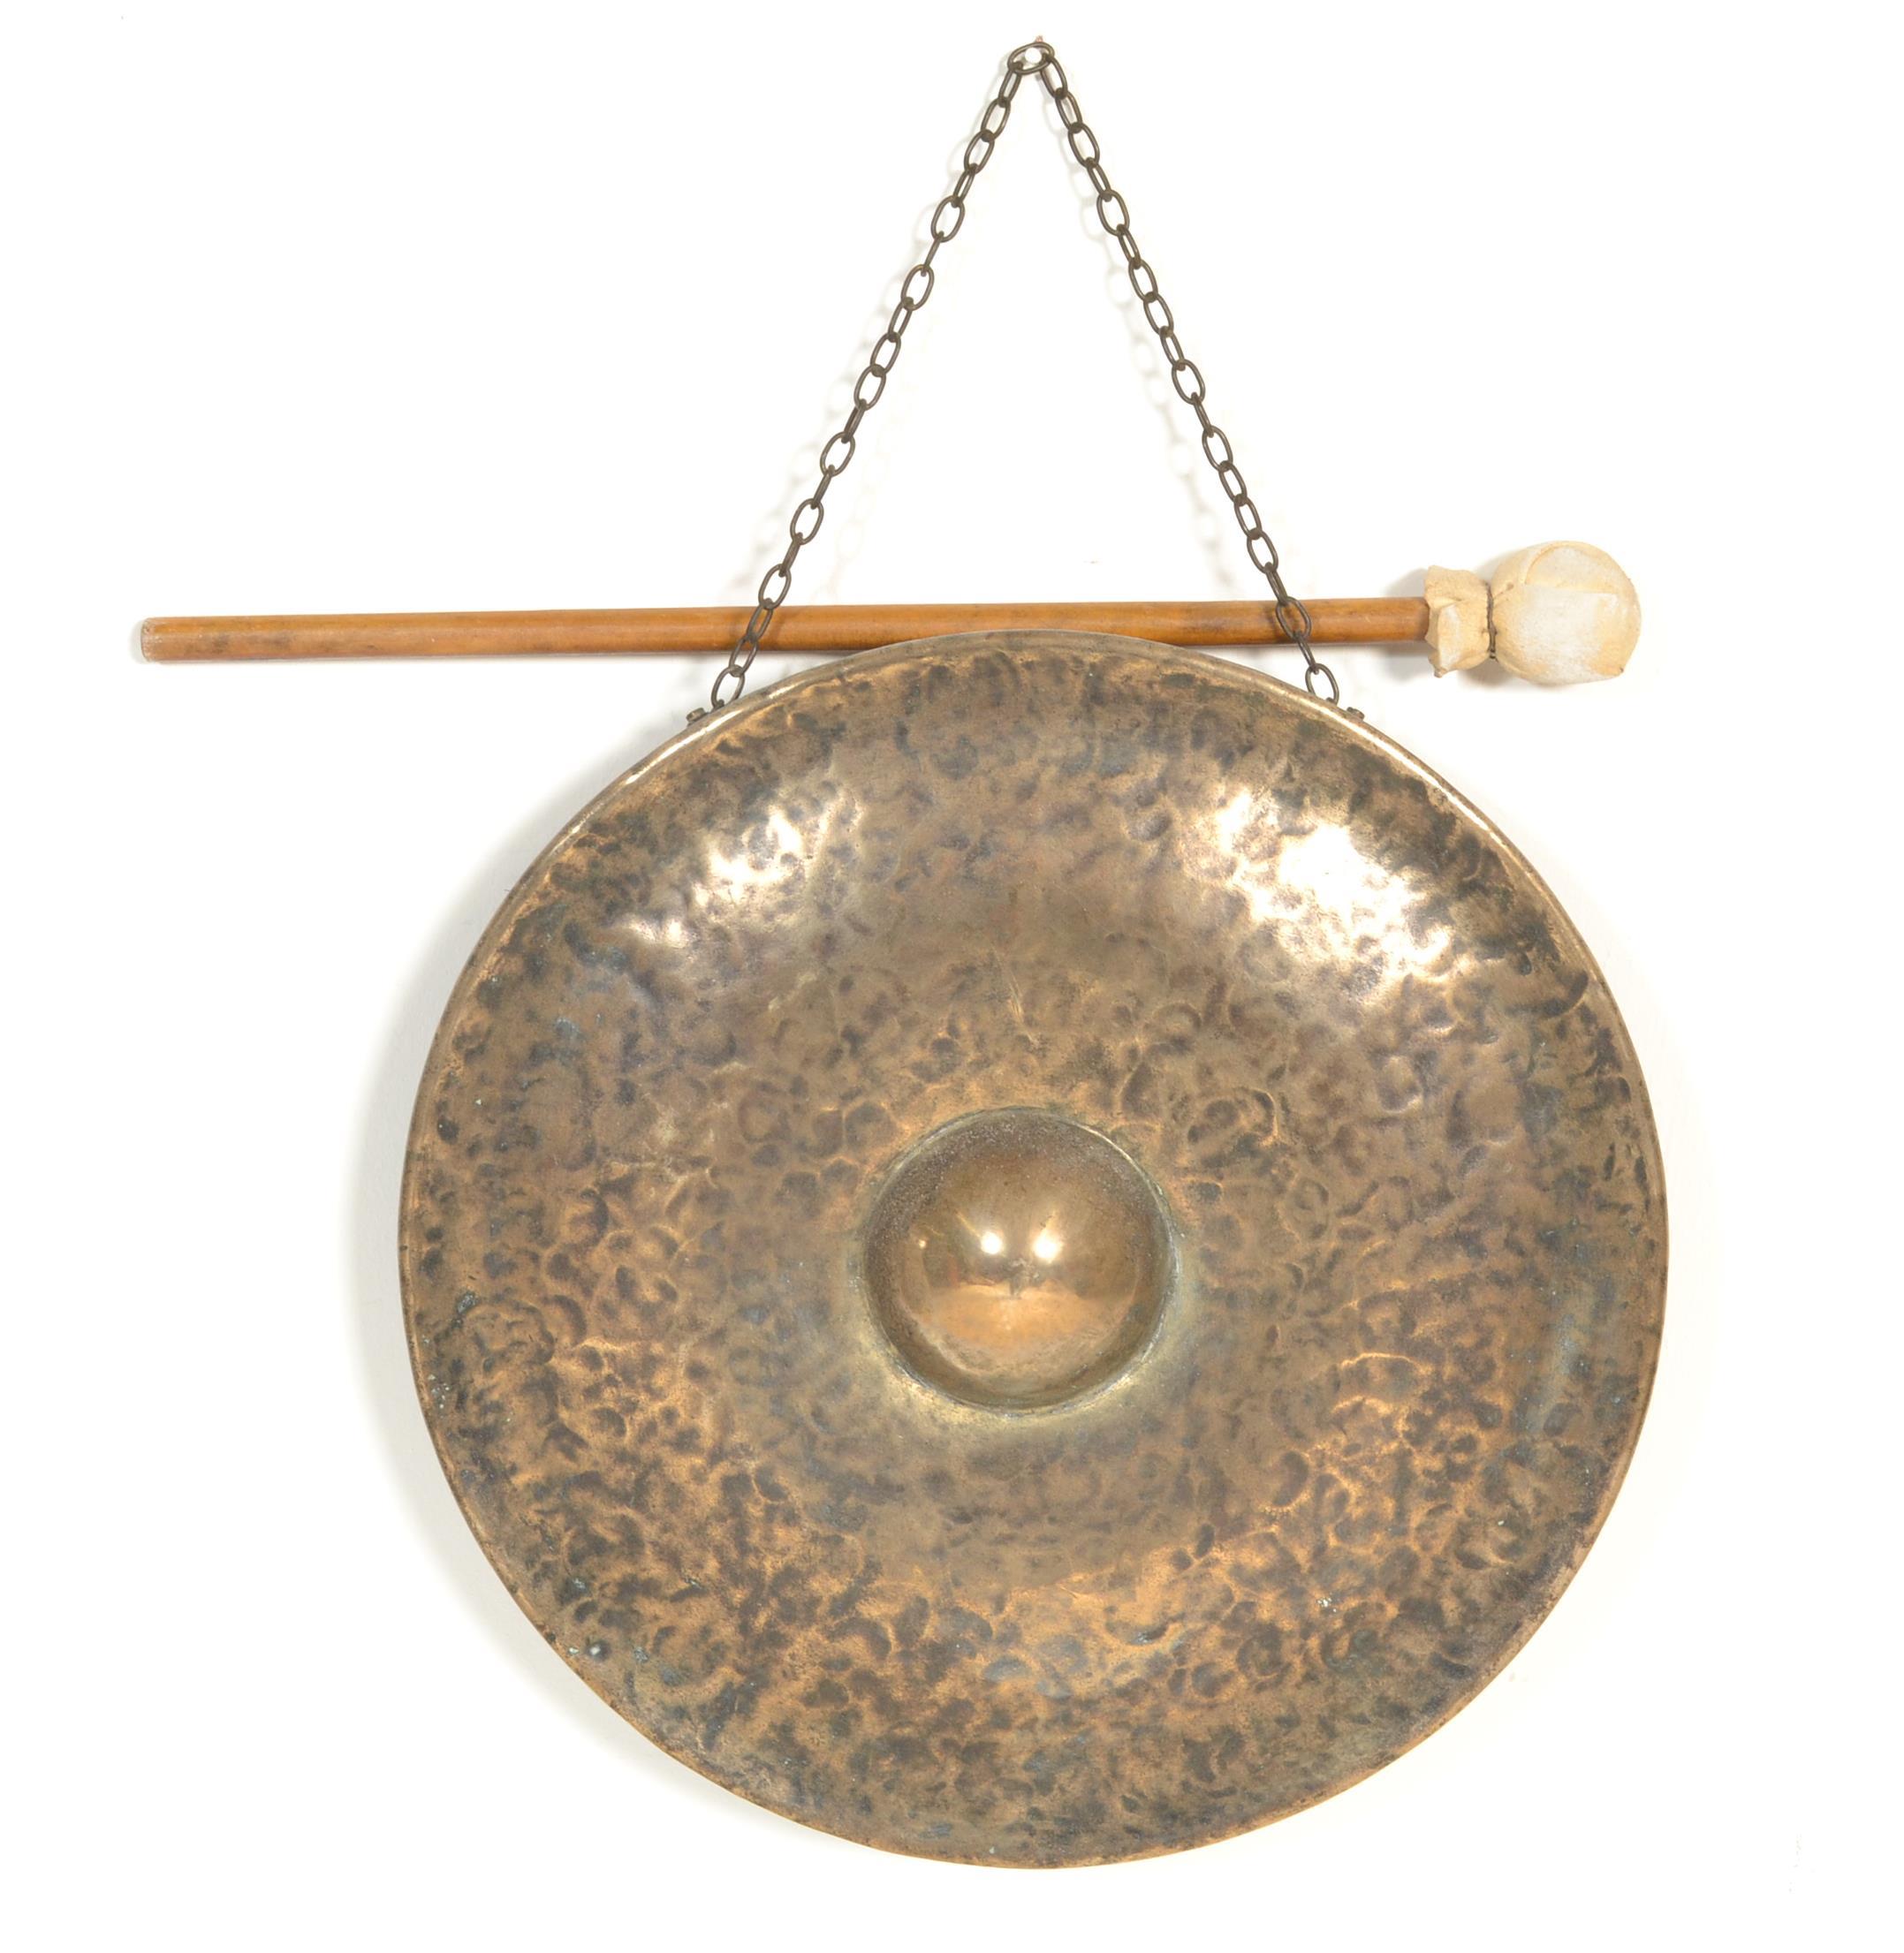 A large early 20th century planished brass gong of roundel form together with the associated